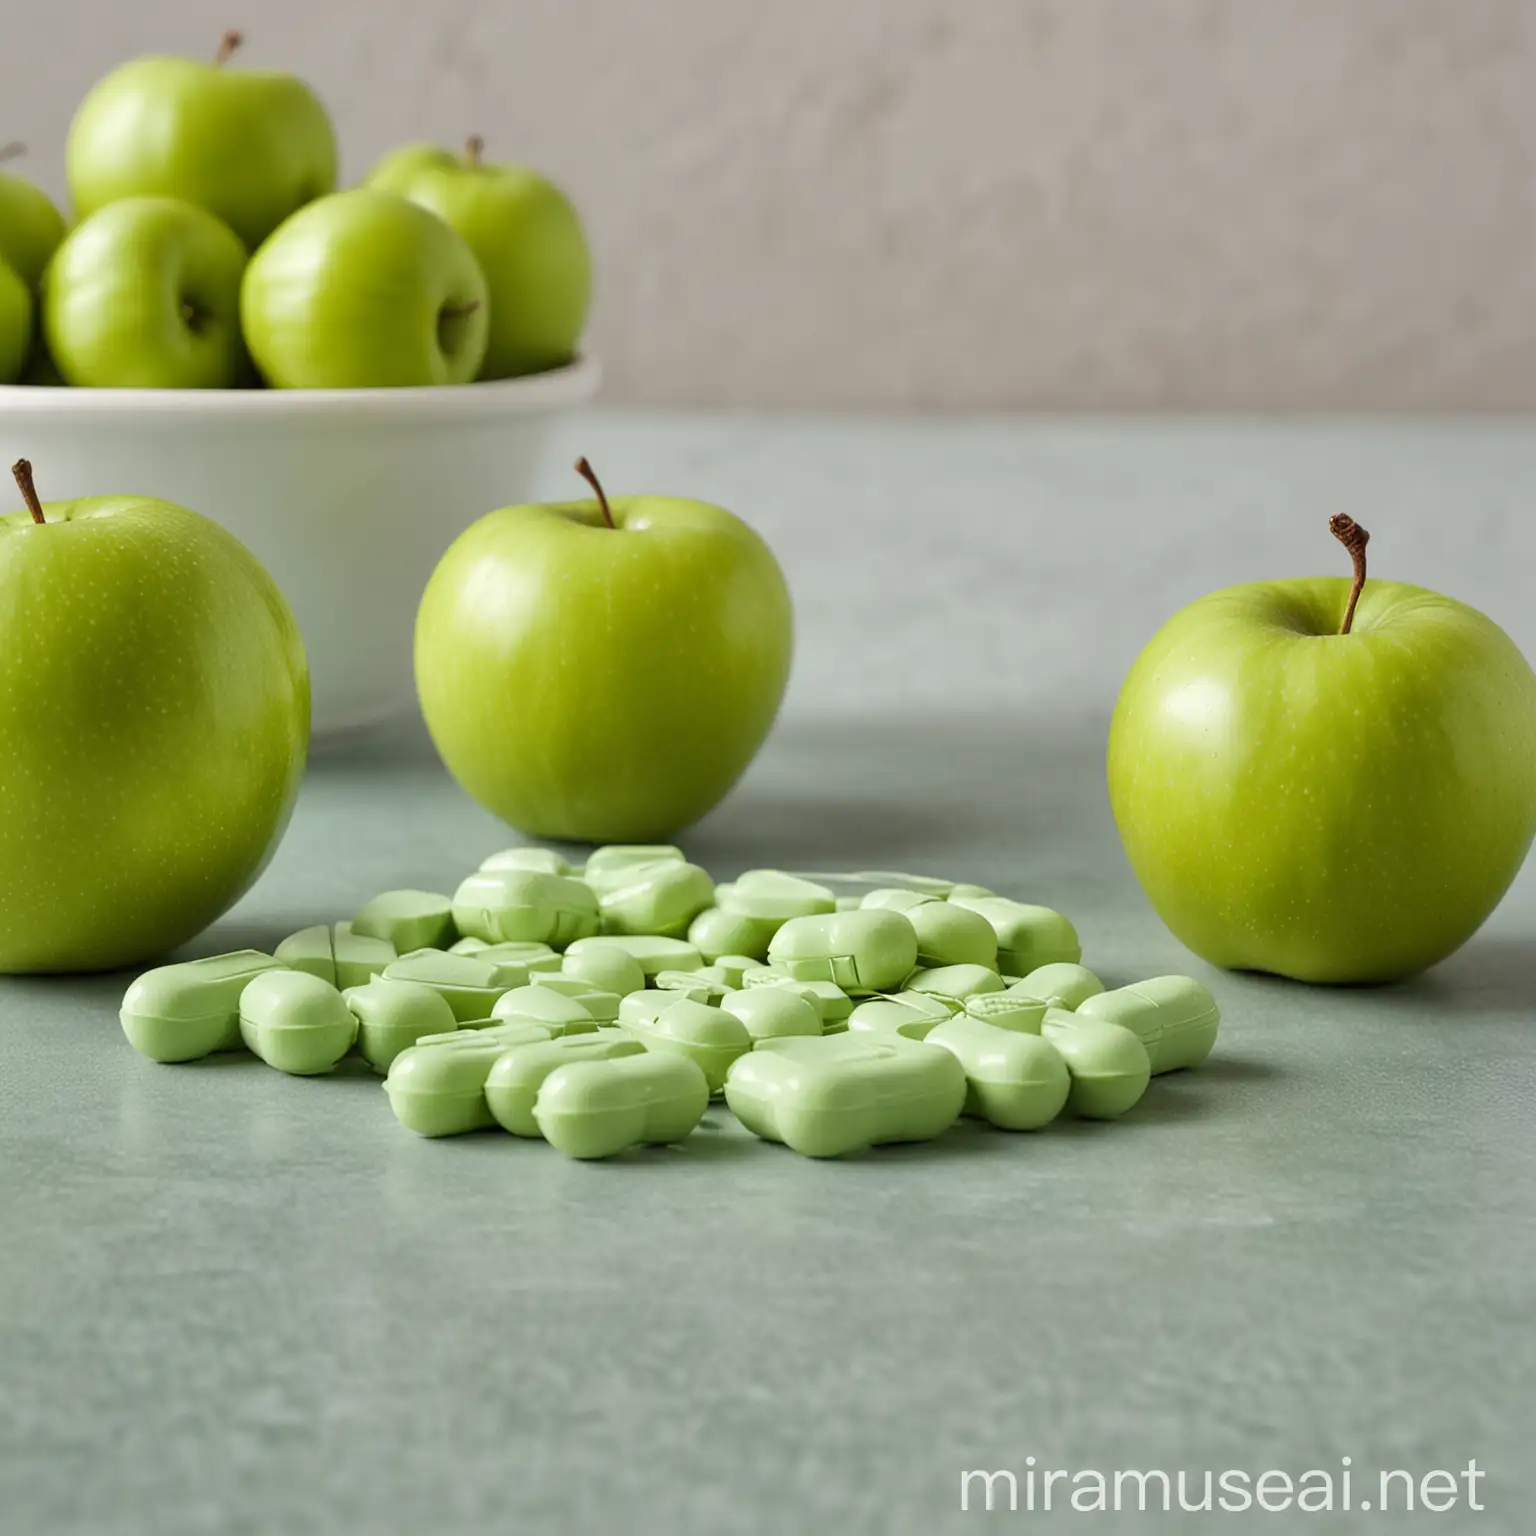 Green pharmaceutical tablets sitting in front of some green apples
